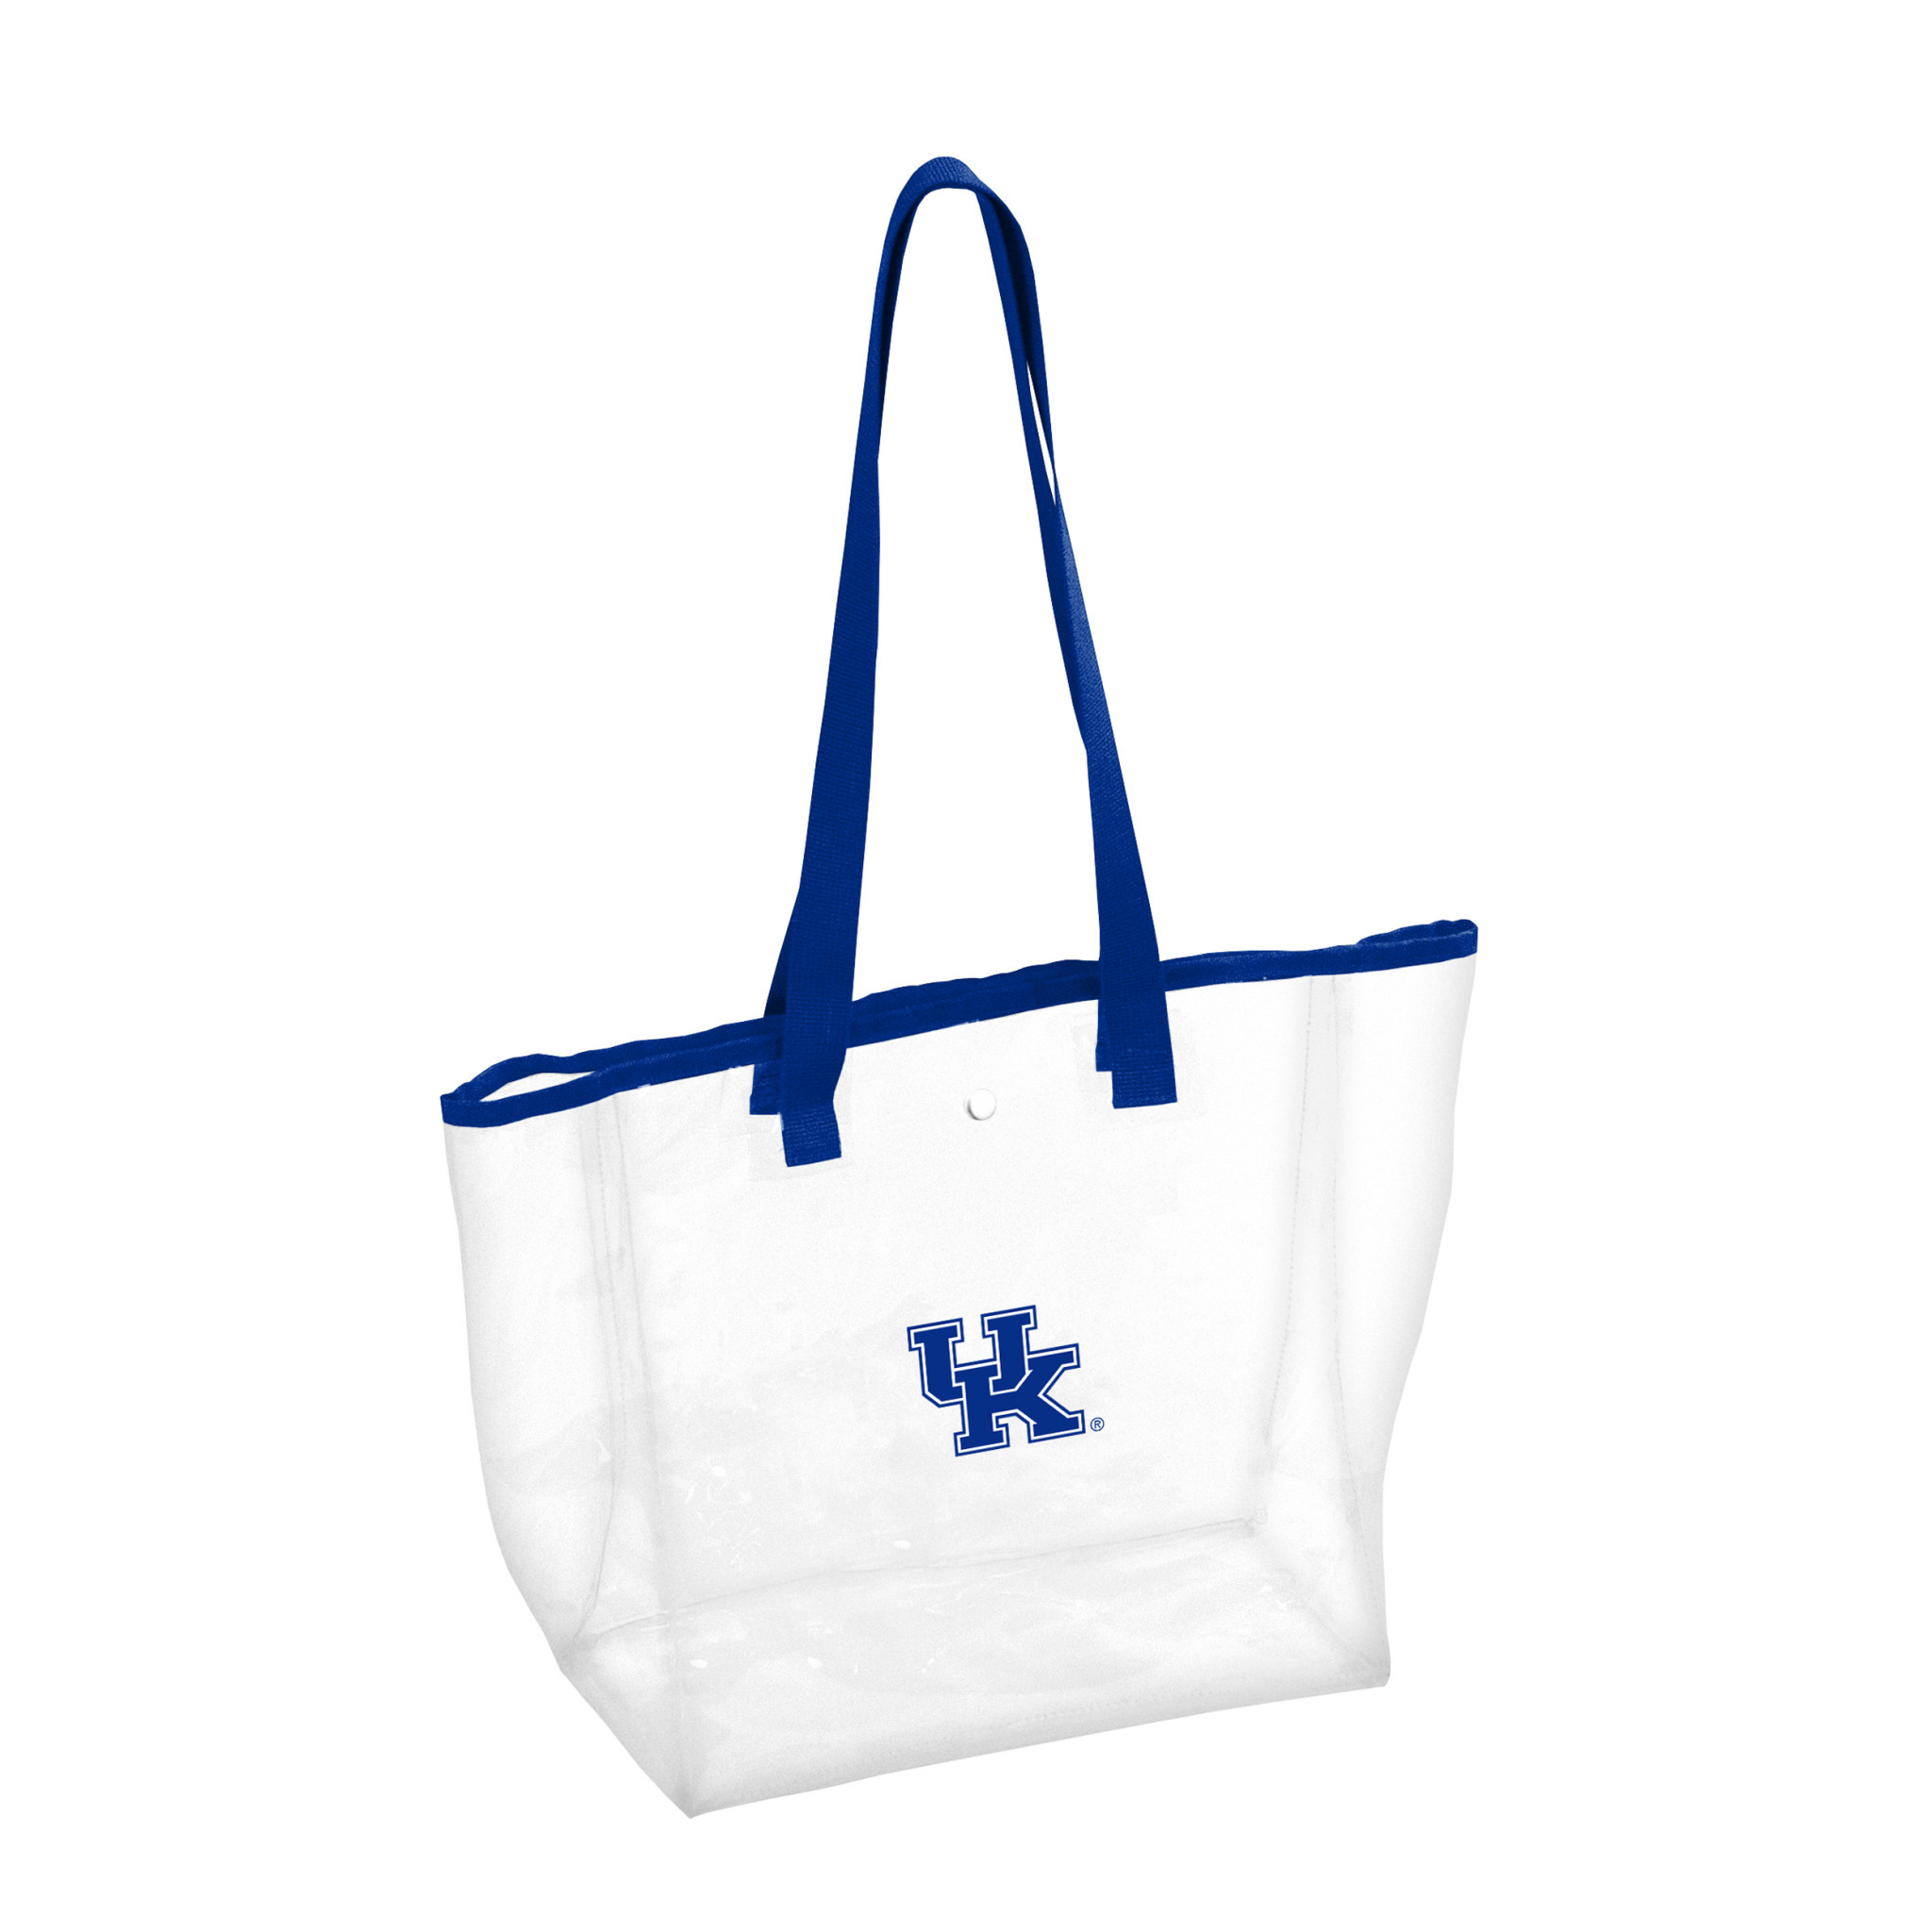  University of Kentucky Tote Bags OFFICIAL University